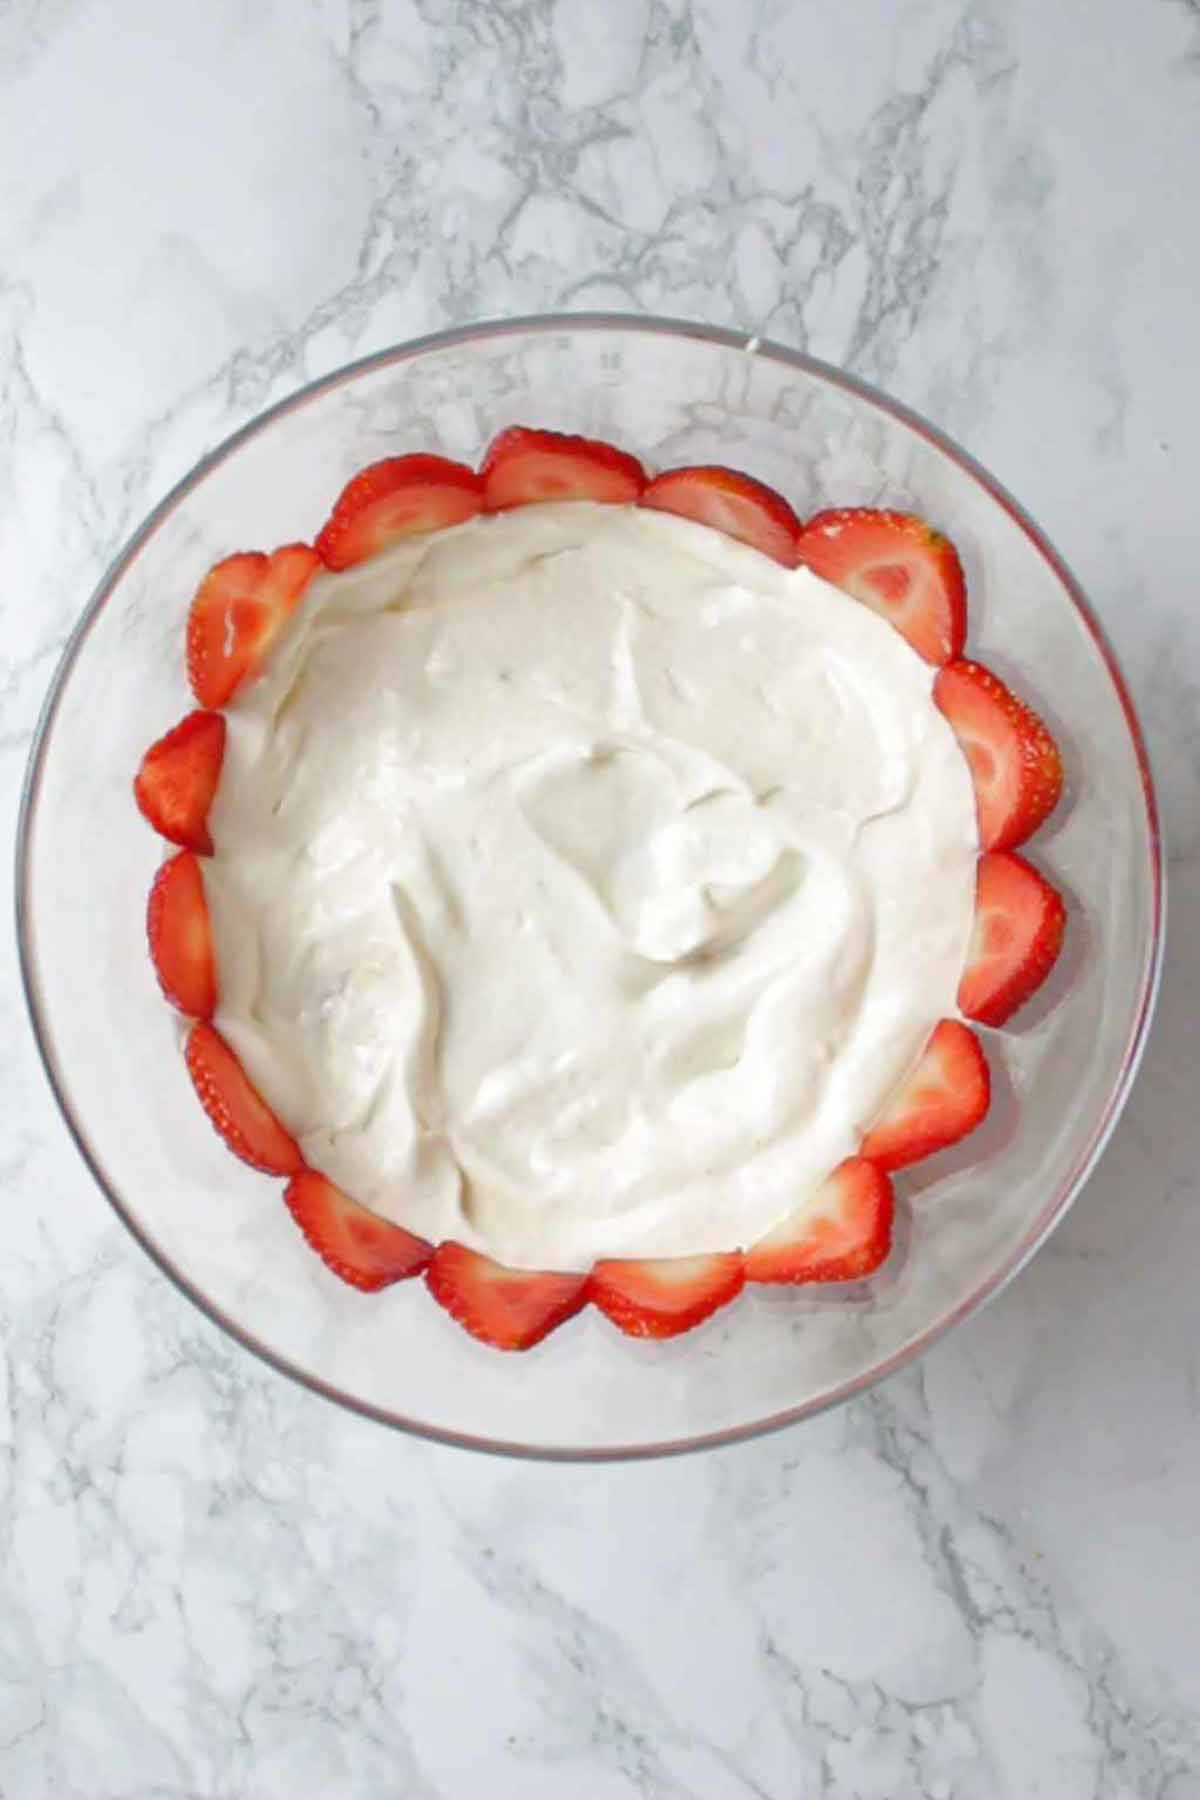 Layer Of Sliced Strawberries and dairy-free cream On The Side Of The Bowl 